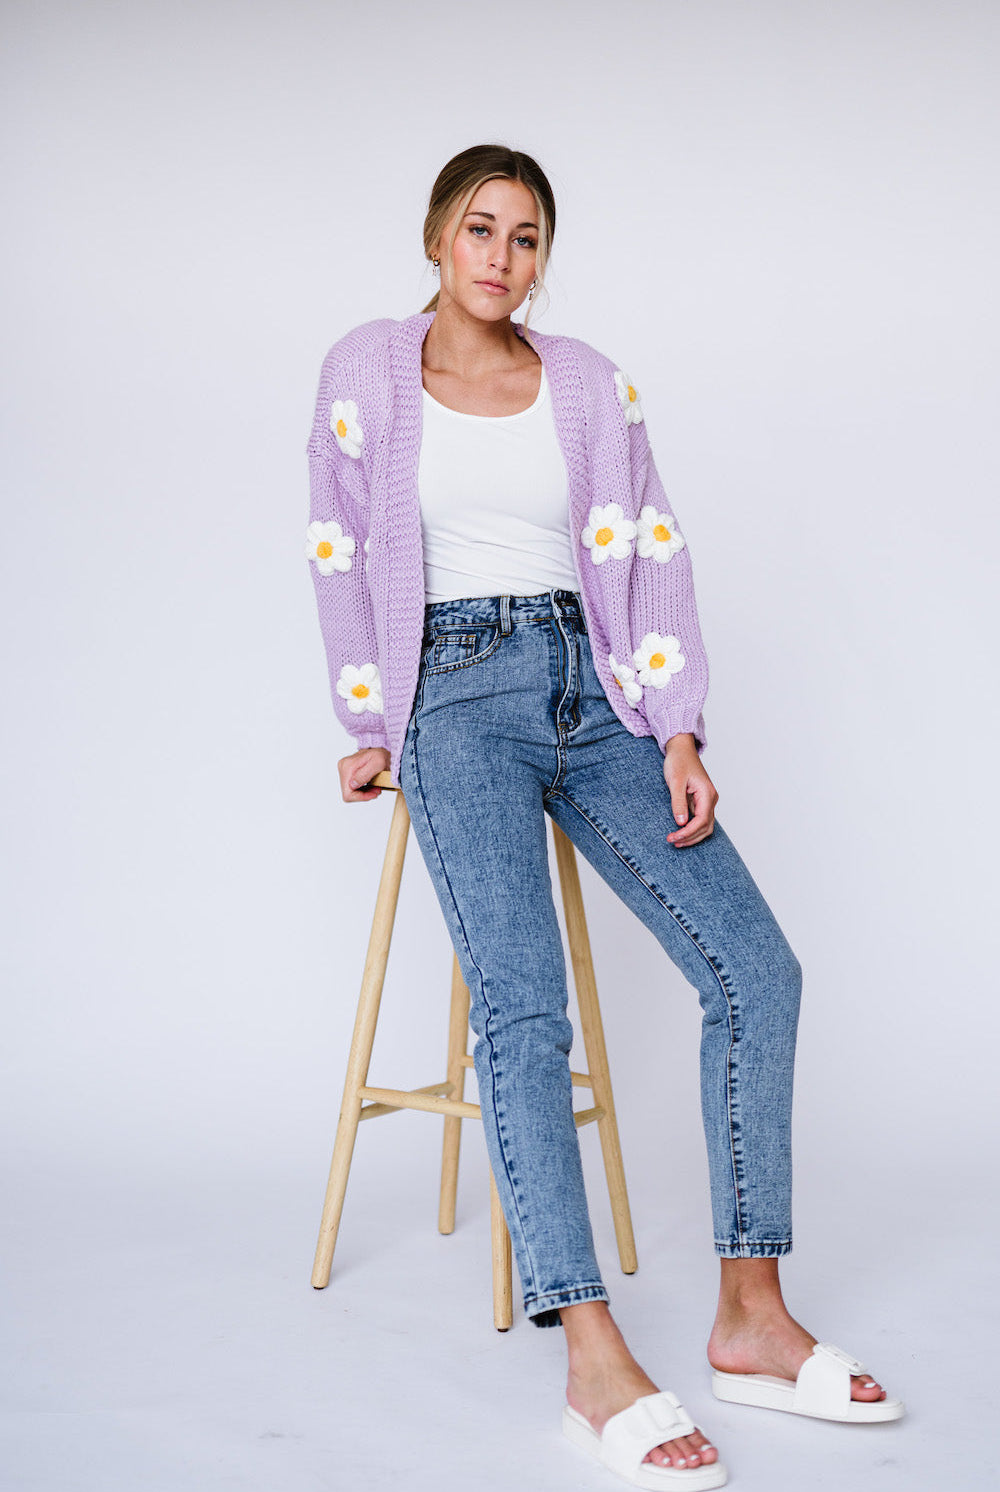 Purple cardigan with white flowers